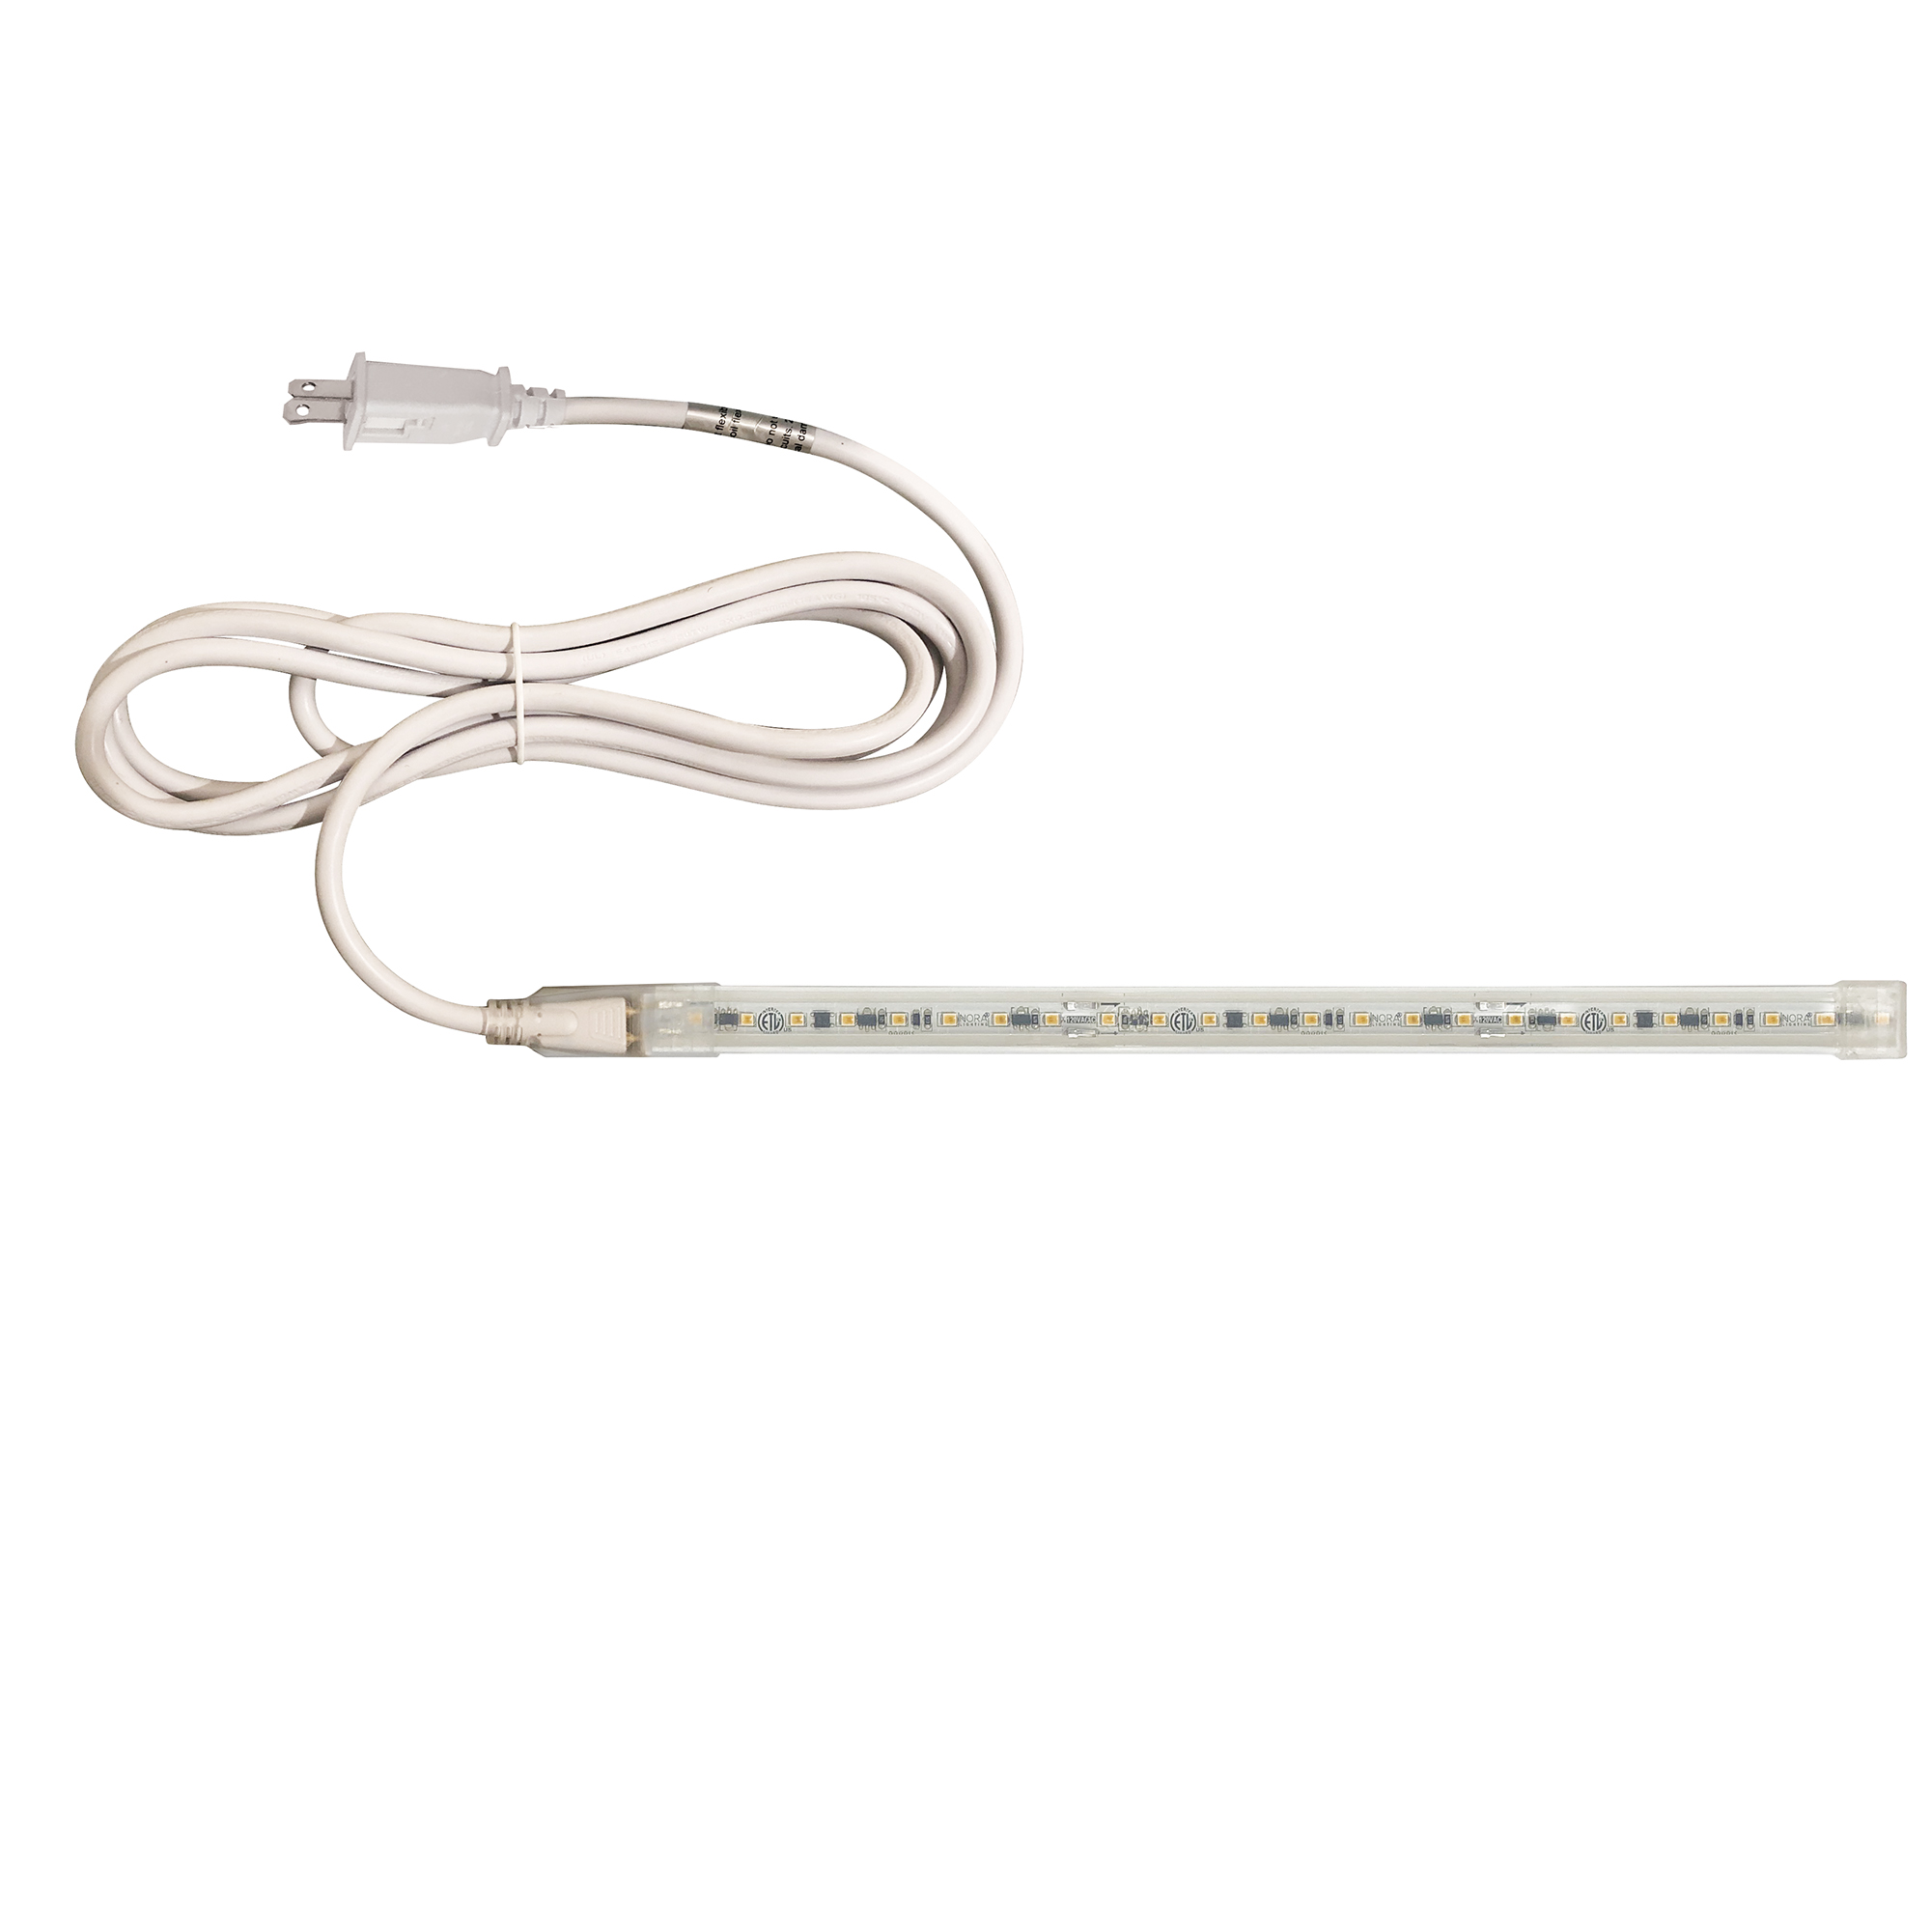 Nora Lighting NUTP13-W12-4-12-930/CP Custom Cut 12-ft, 4-in 120V Continuous LED Tape Light, 330lm / 3.6W per foot, 3000K, w/ Mounting Clips and 8